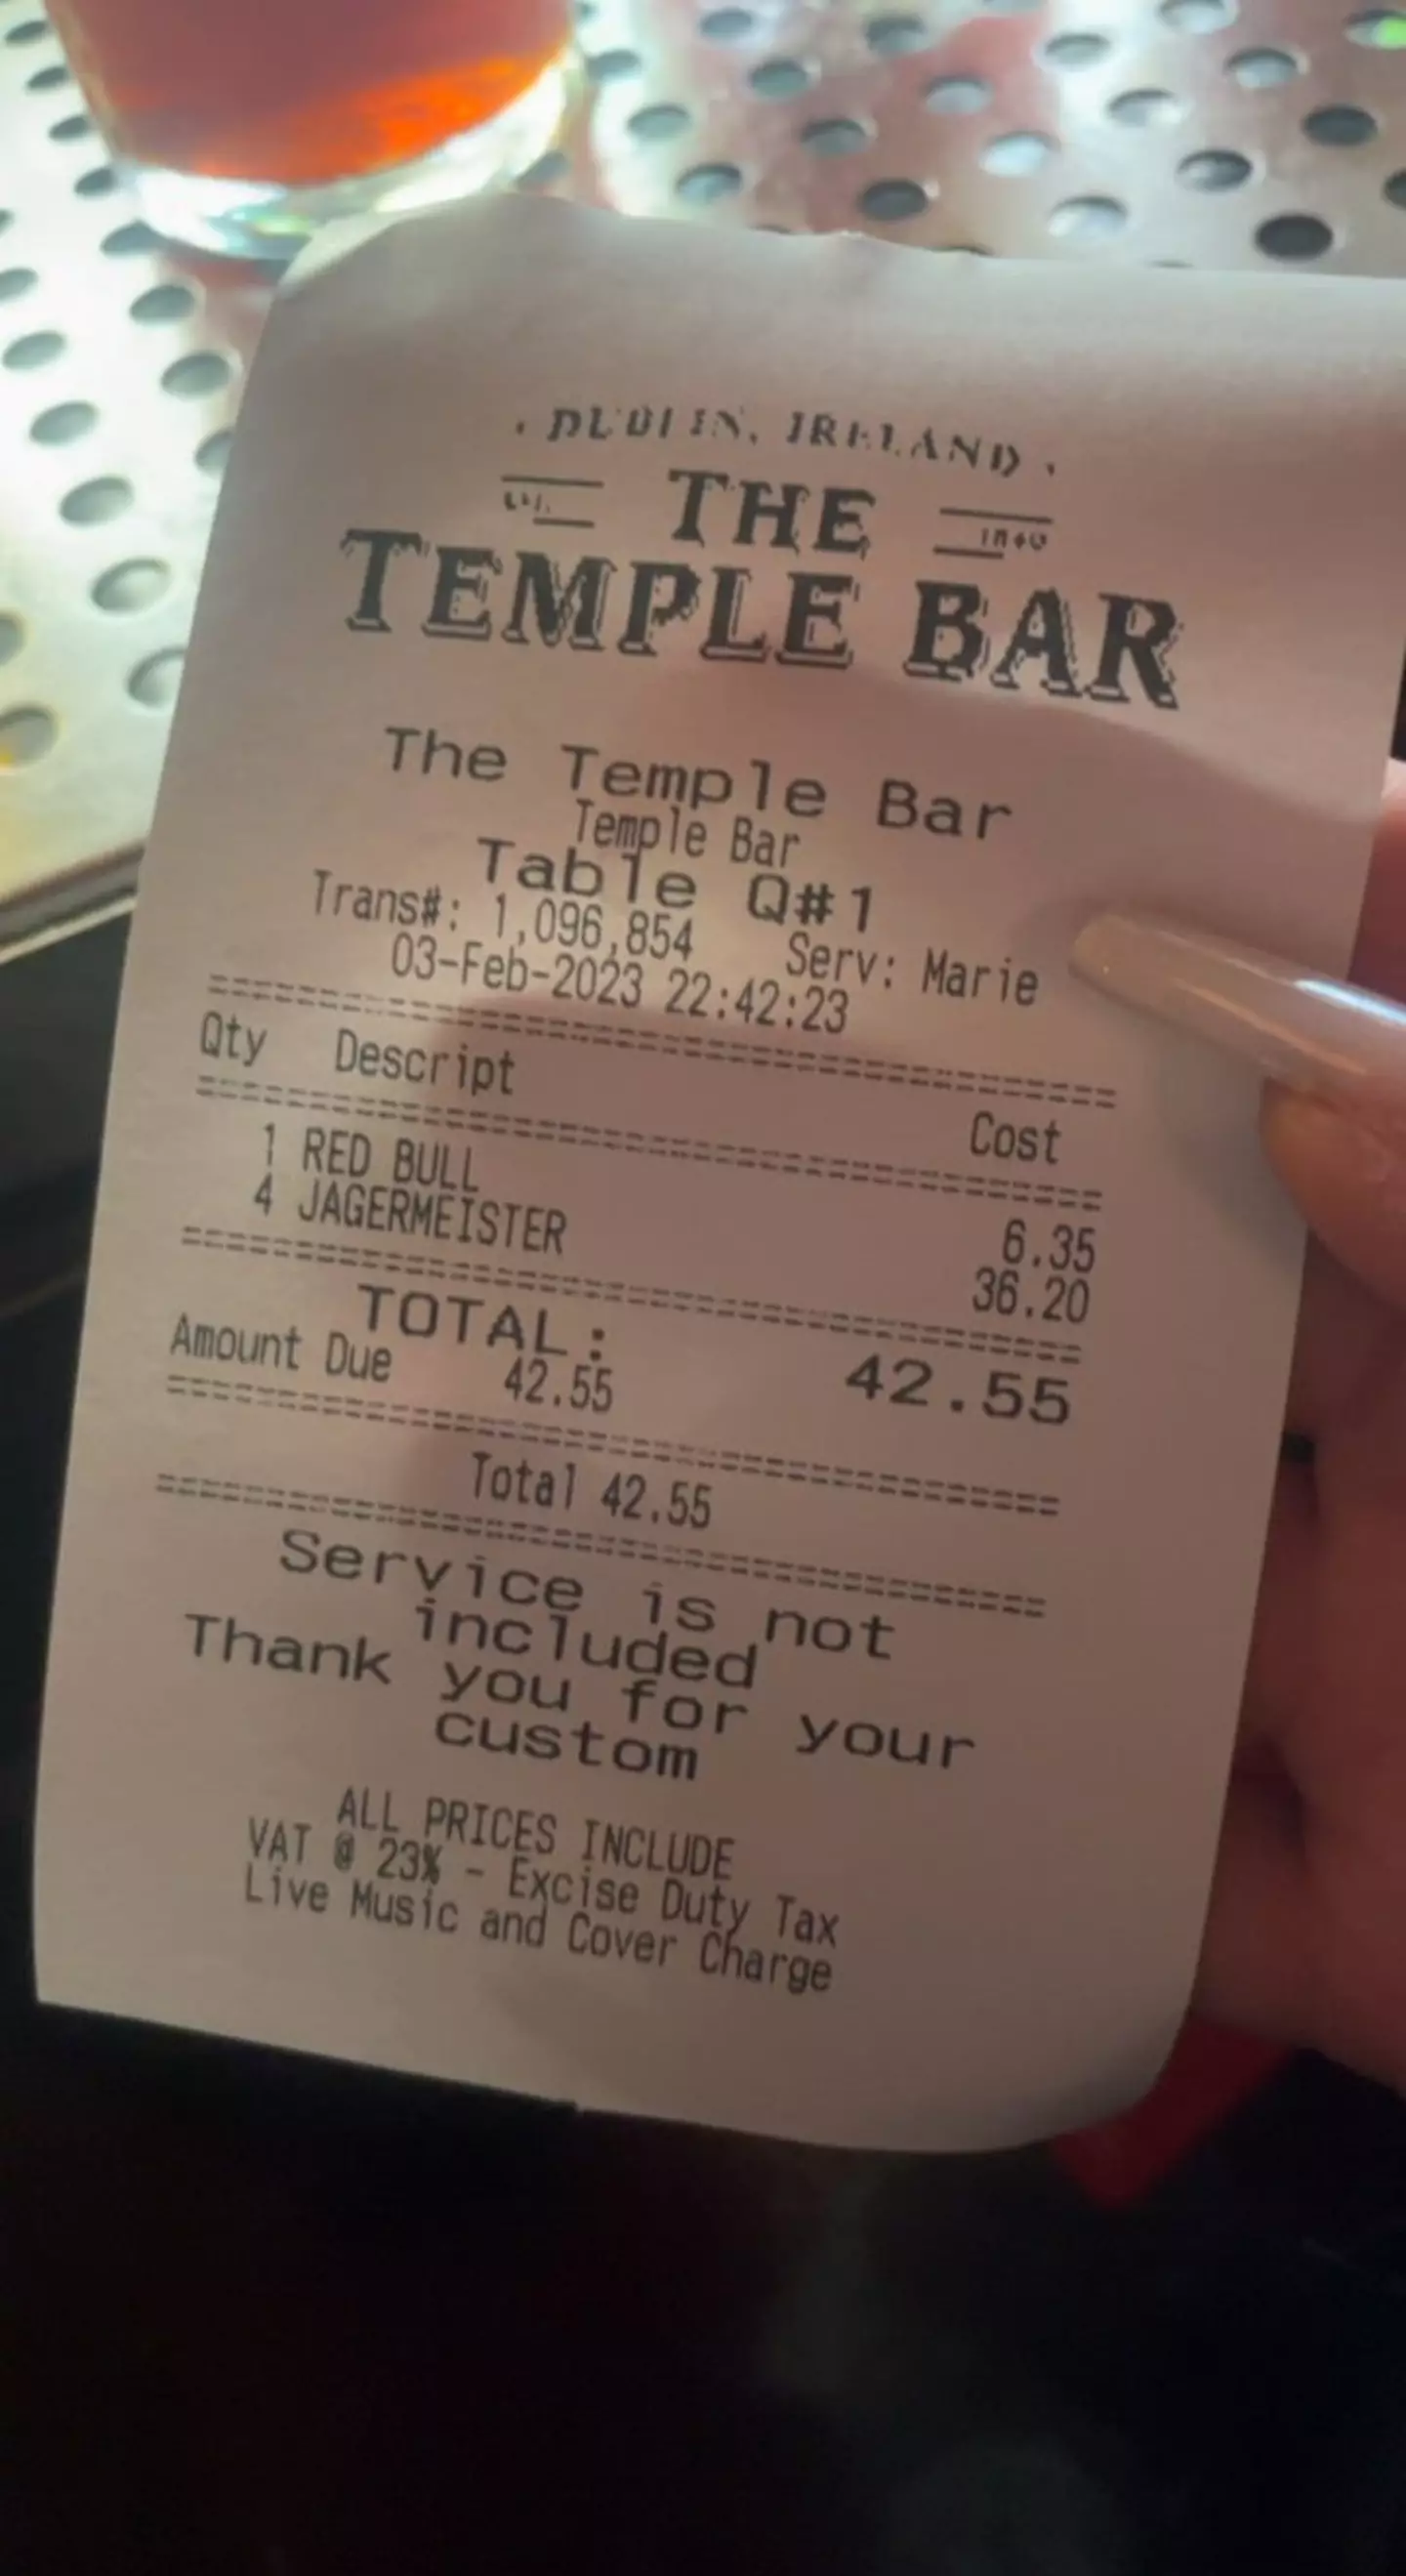 Pub-goers certainly cannot believe that Dublin's Temple Bar pub is charging over the odds for age-old concoction of Red Bull and Jagermeister.